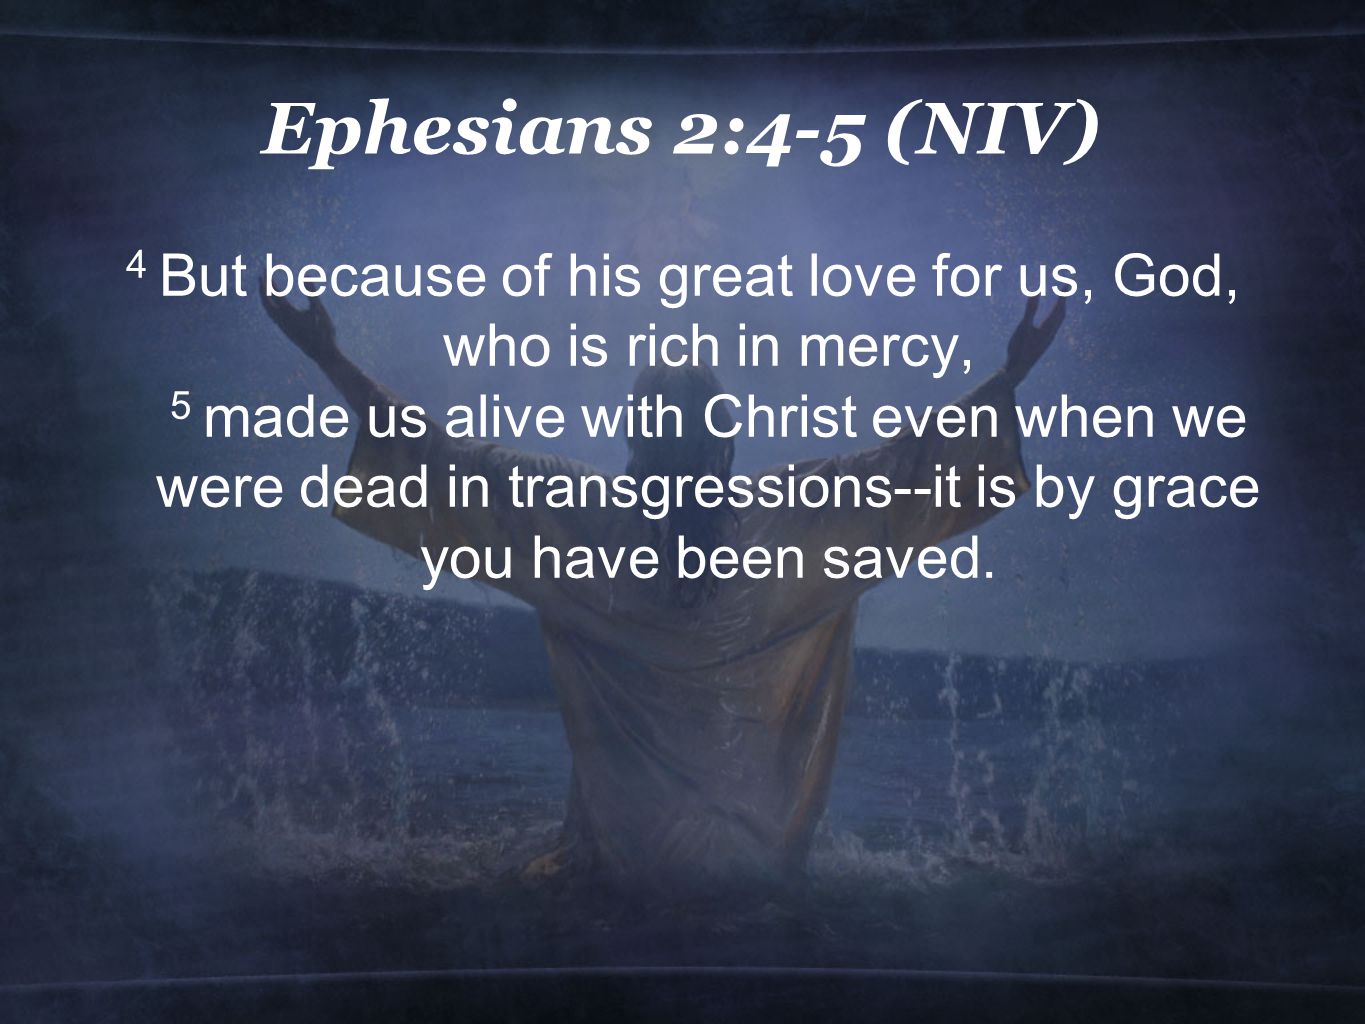 Ephesians 2:4-5 (NIV) 4 But because of his great love for us, God, who is rich in mercy, 5 made us alive with Christ even when we were dead in transgressions--it is by grace you have been saved.